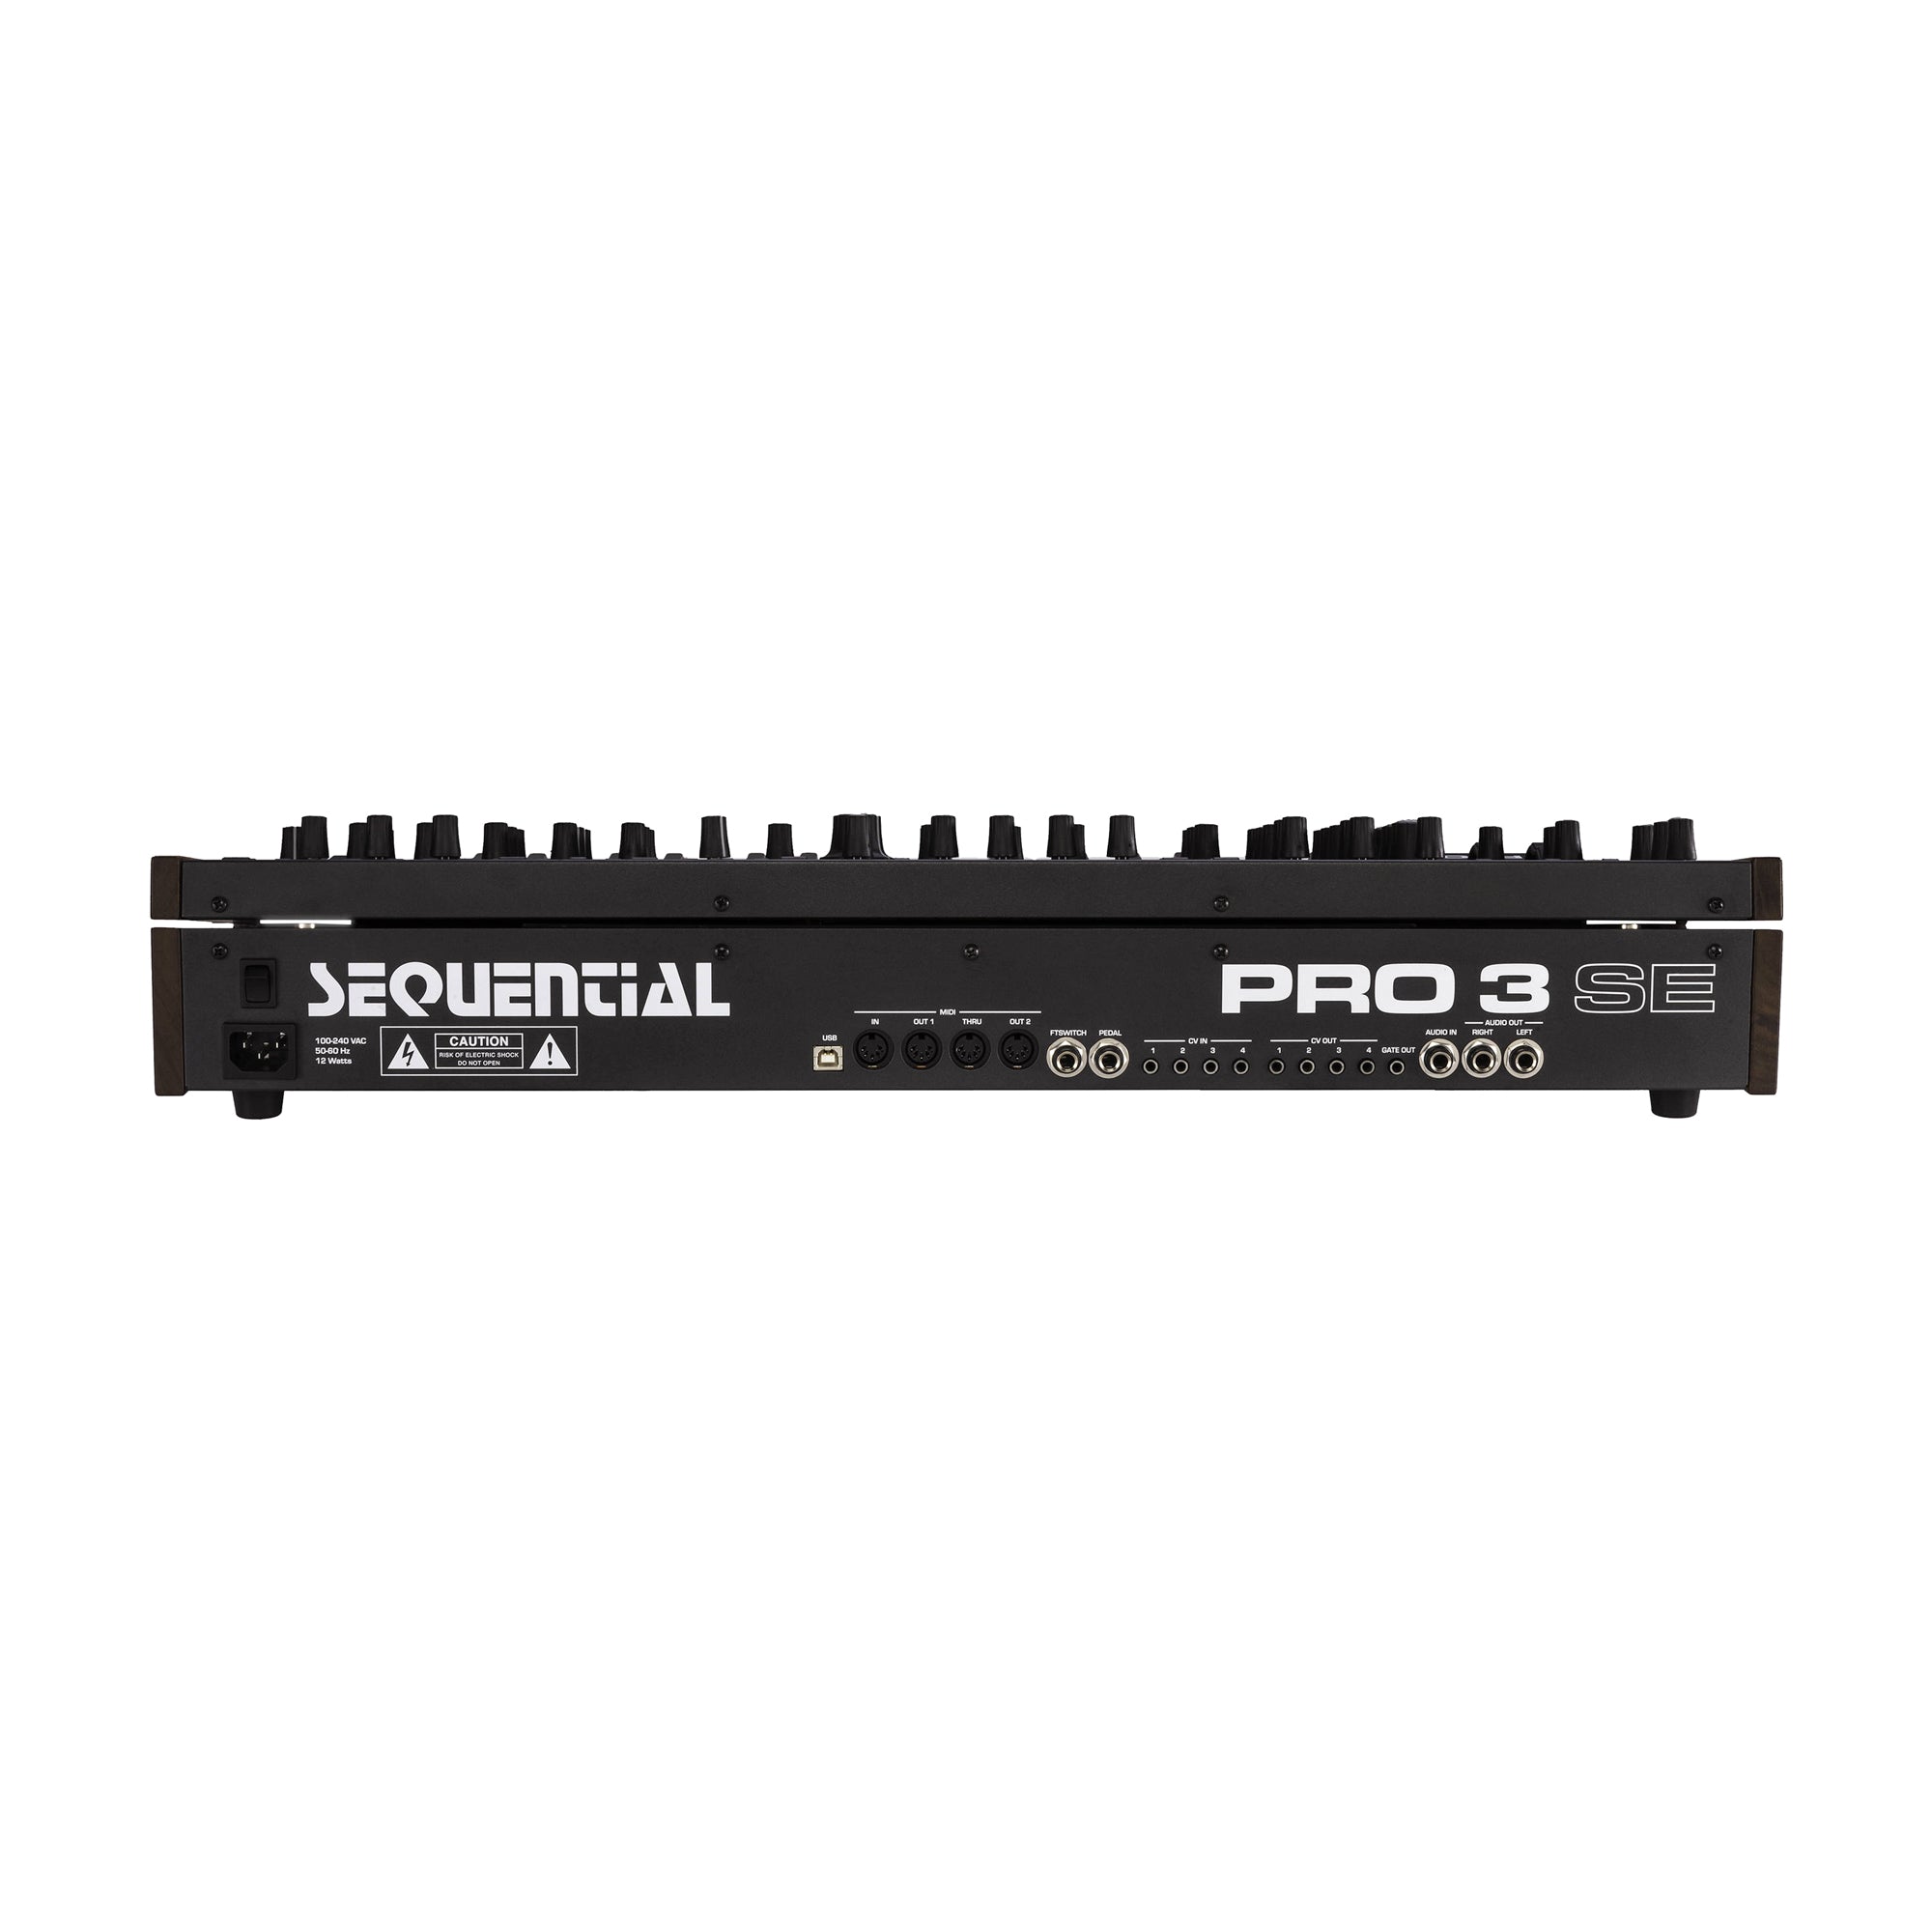 Sequential Pro 3 SE Special Edition Multi Filter Mono Synthesizer Keyboard